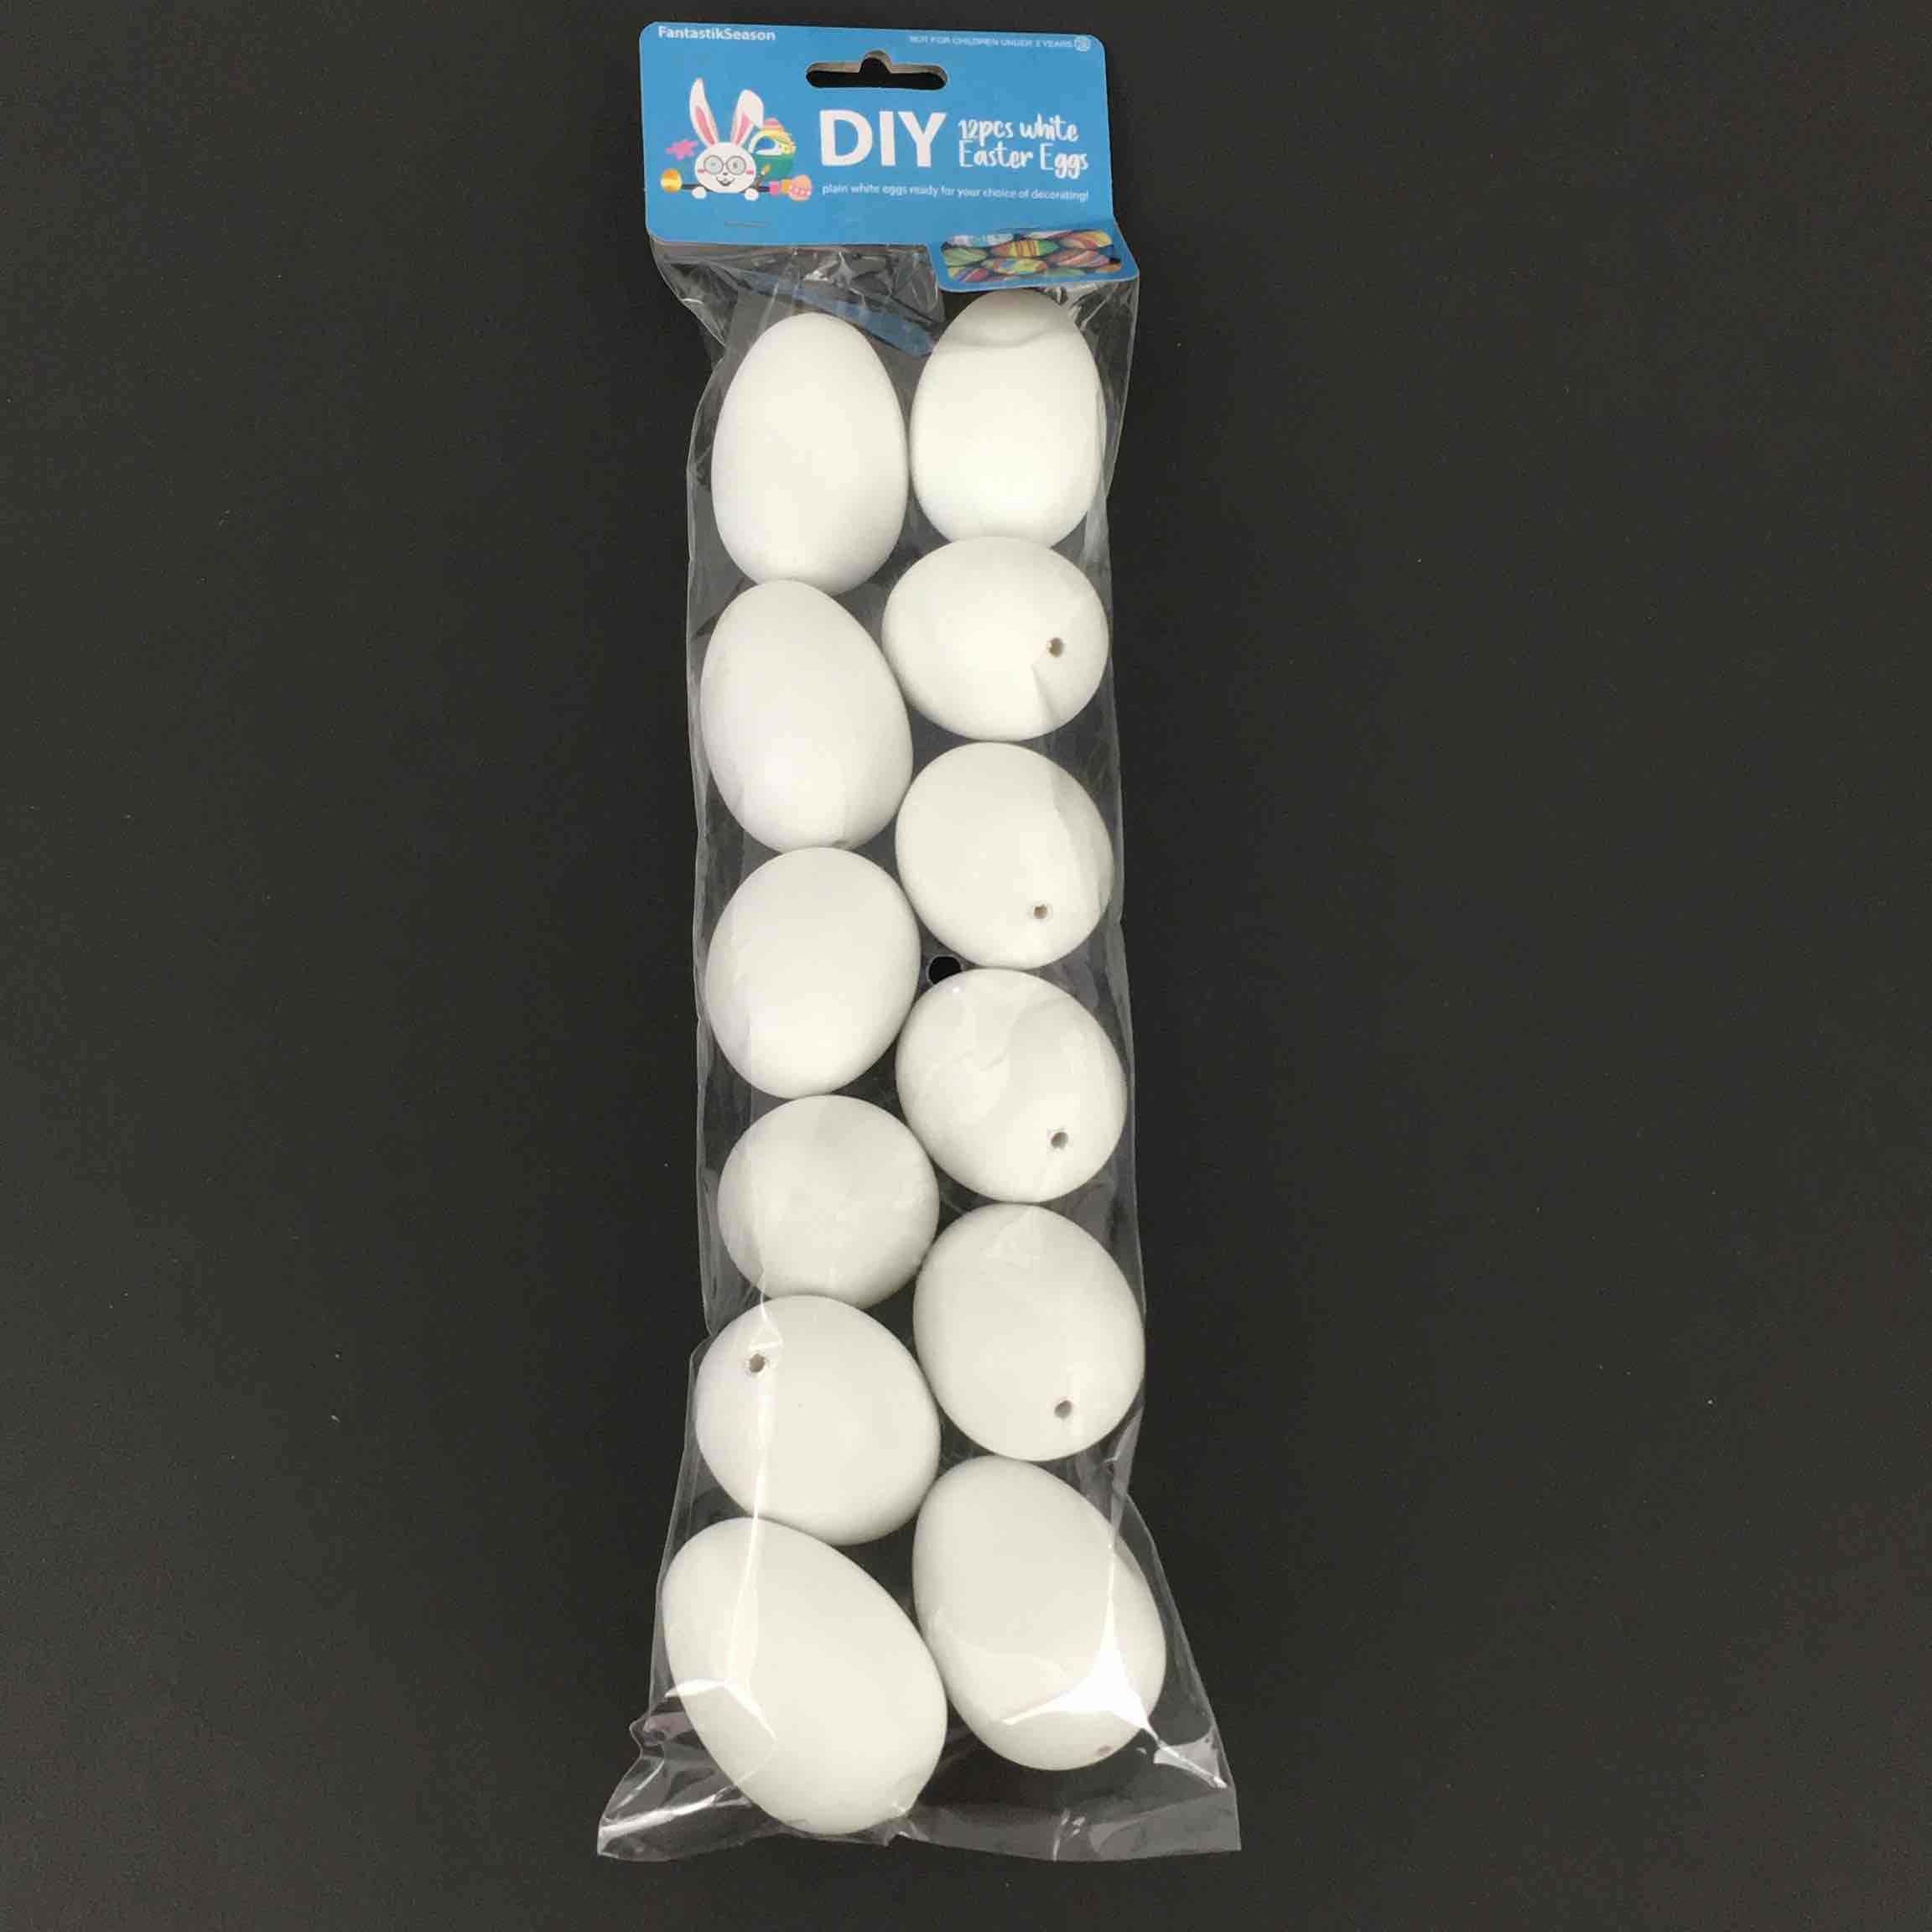 EASTER EGGS "PAINT YOURSELF" DIY 2.5IN 12PCS